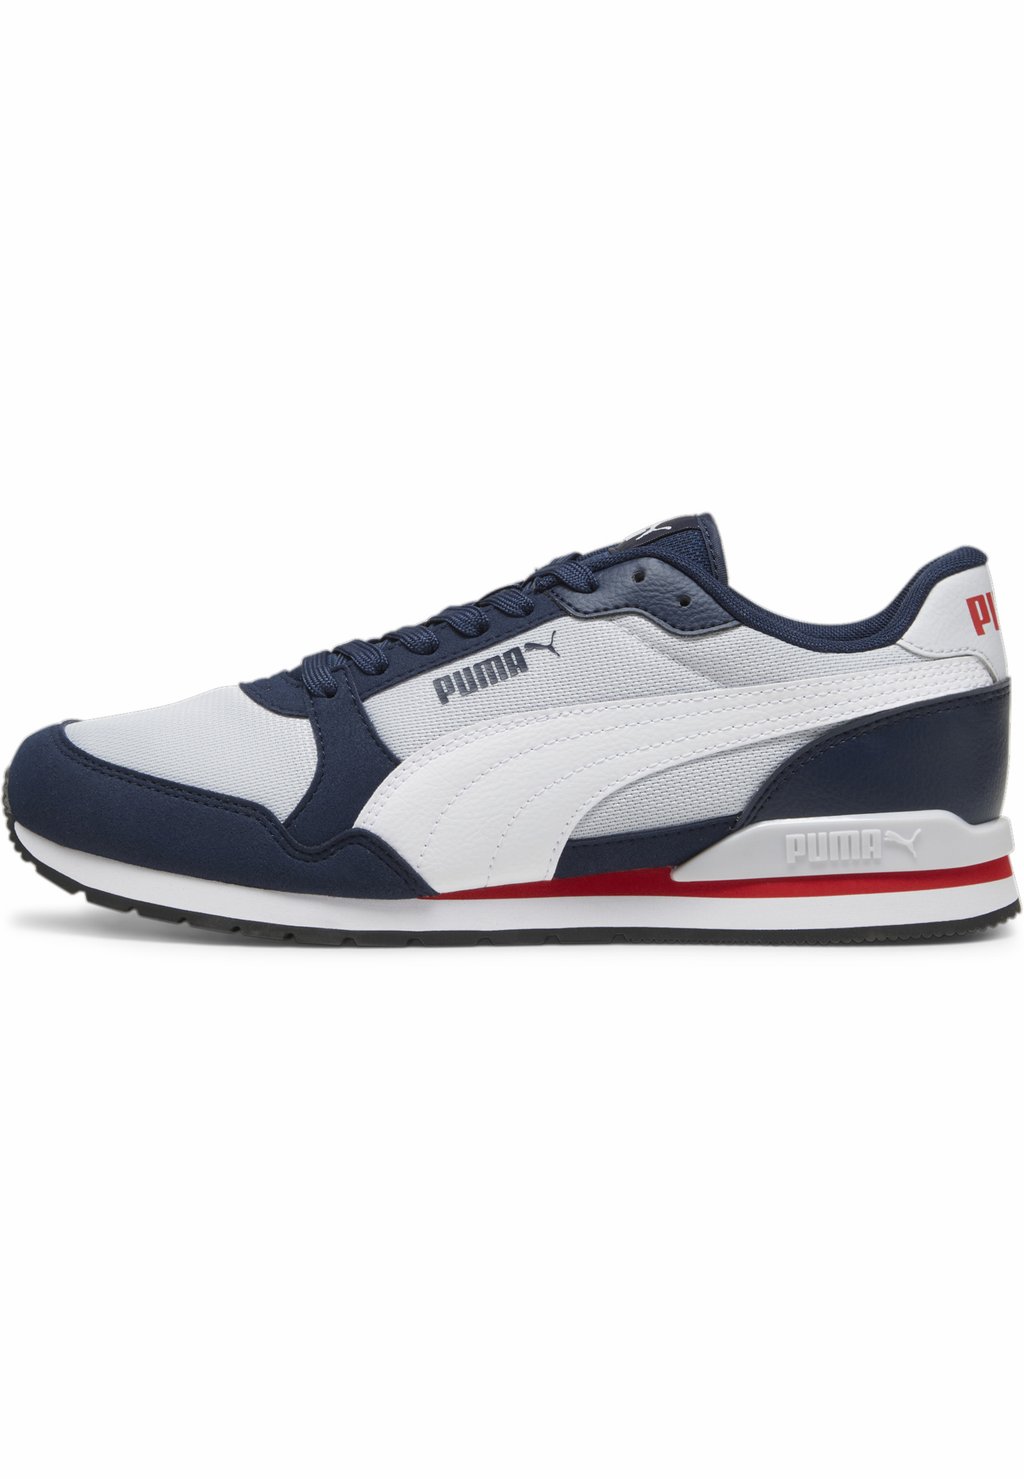 Низкие кроссовки Runner Puma, цвет silver mist white club navy for all time red black middleton ant red mist